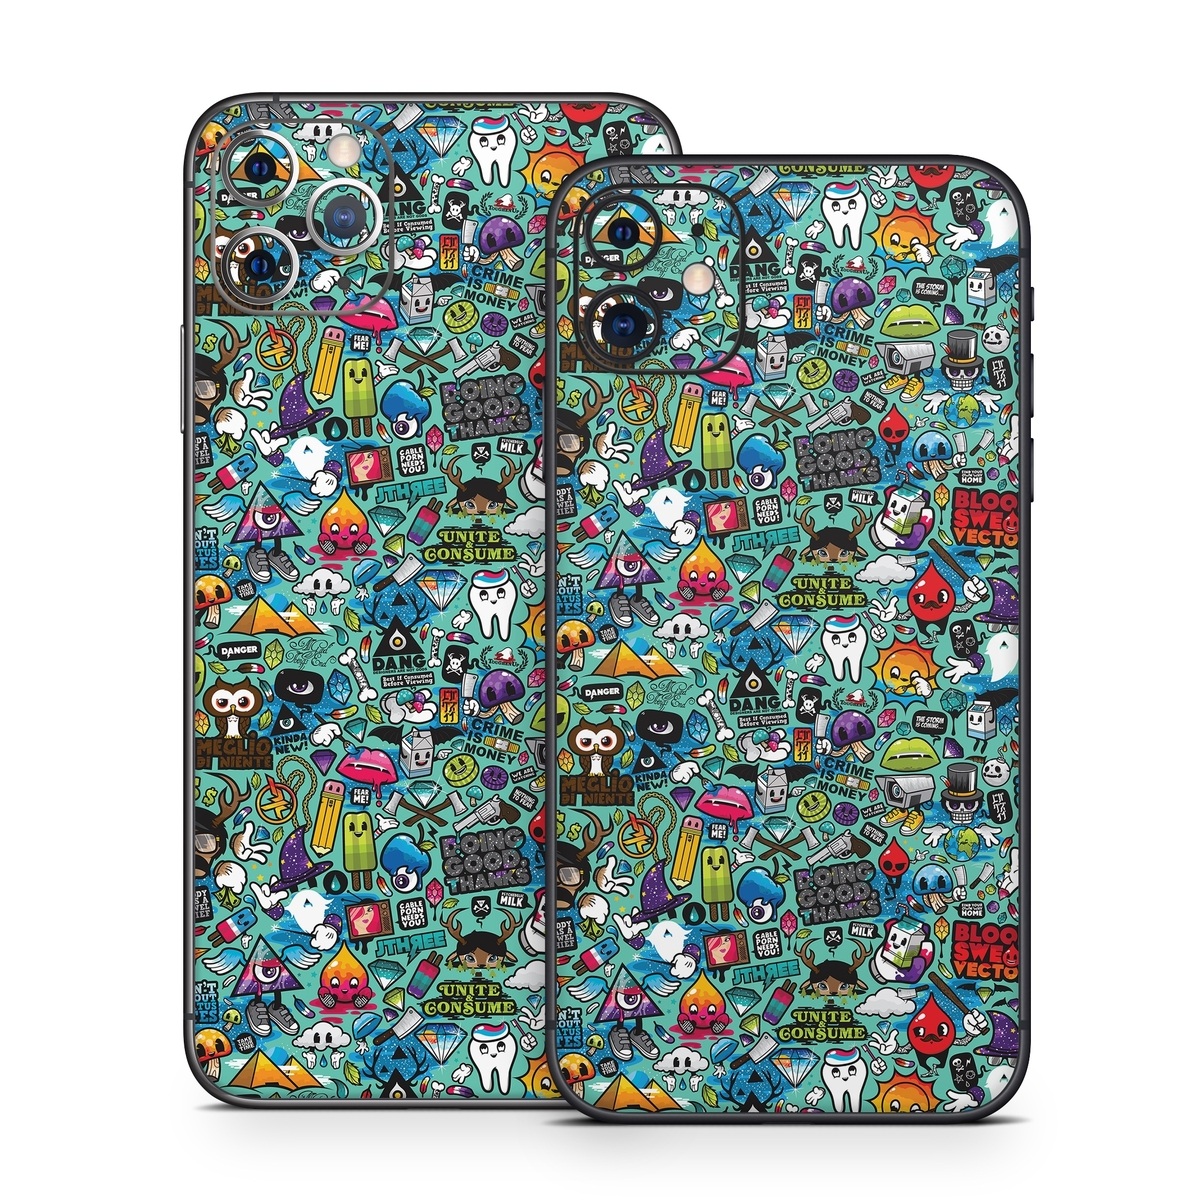 iPhone 11 Skin design of Cartoon, Art, Pattern, Design, Illustration, Visual arts, Doodle, Psychedelic art with black, blue, gray, red, green colors